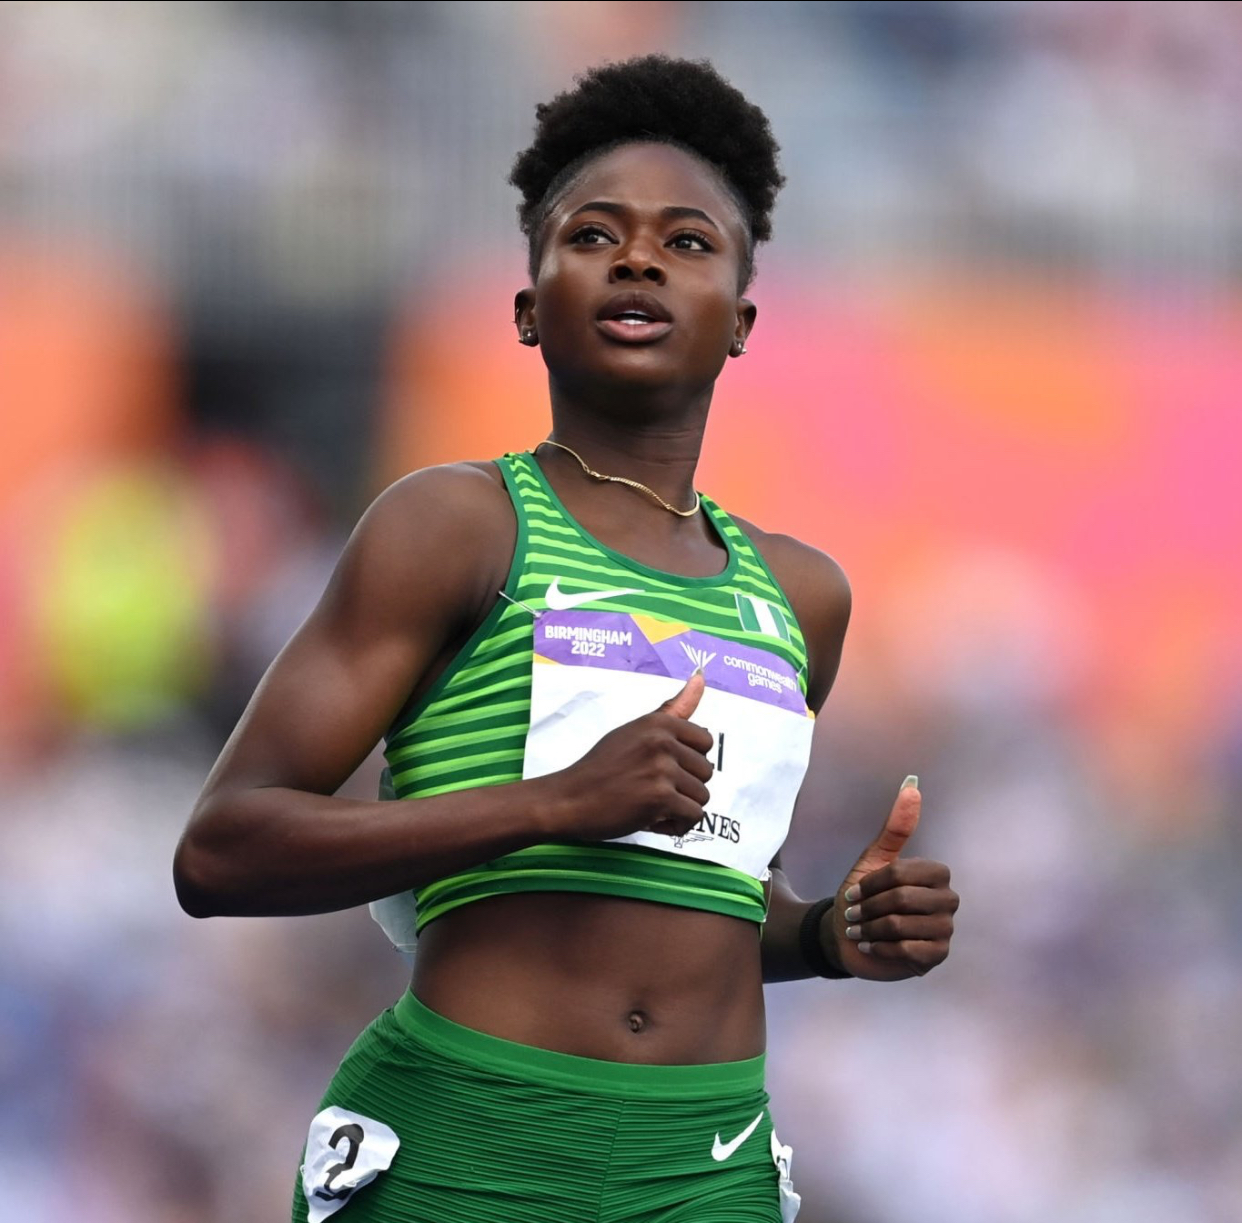 #2022CWG: Ofili Becomes Third Nigerian Woman To Qualify For 200m Final